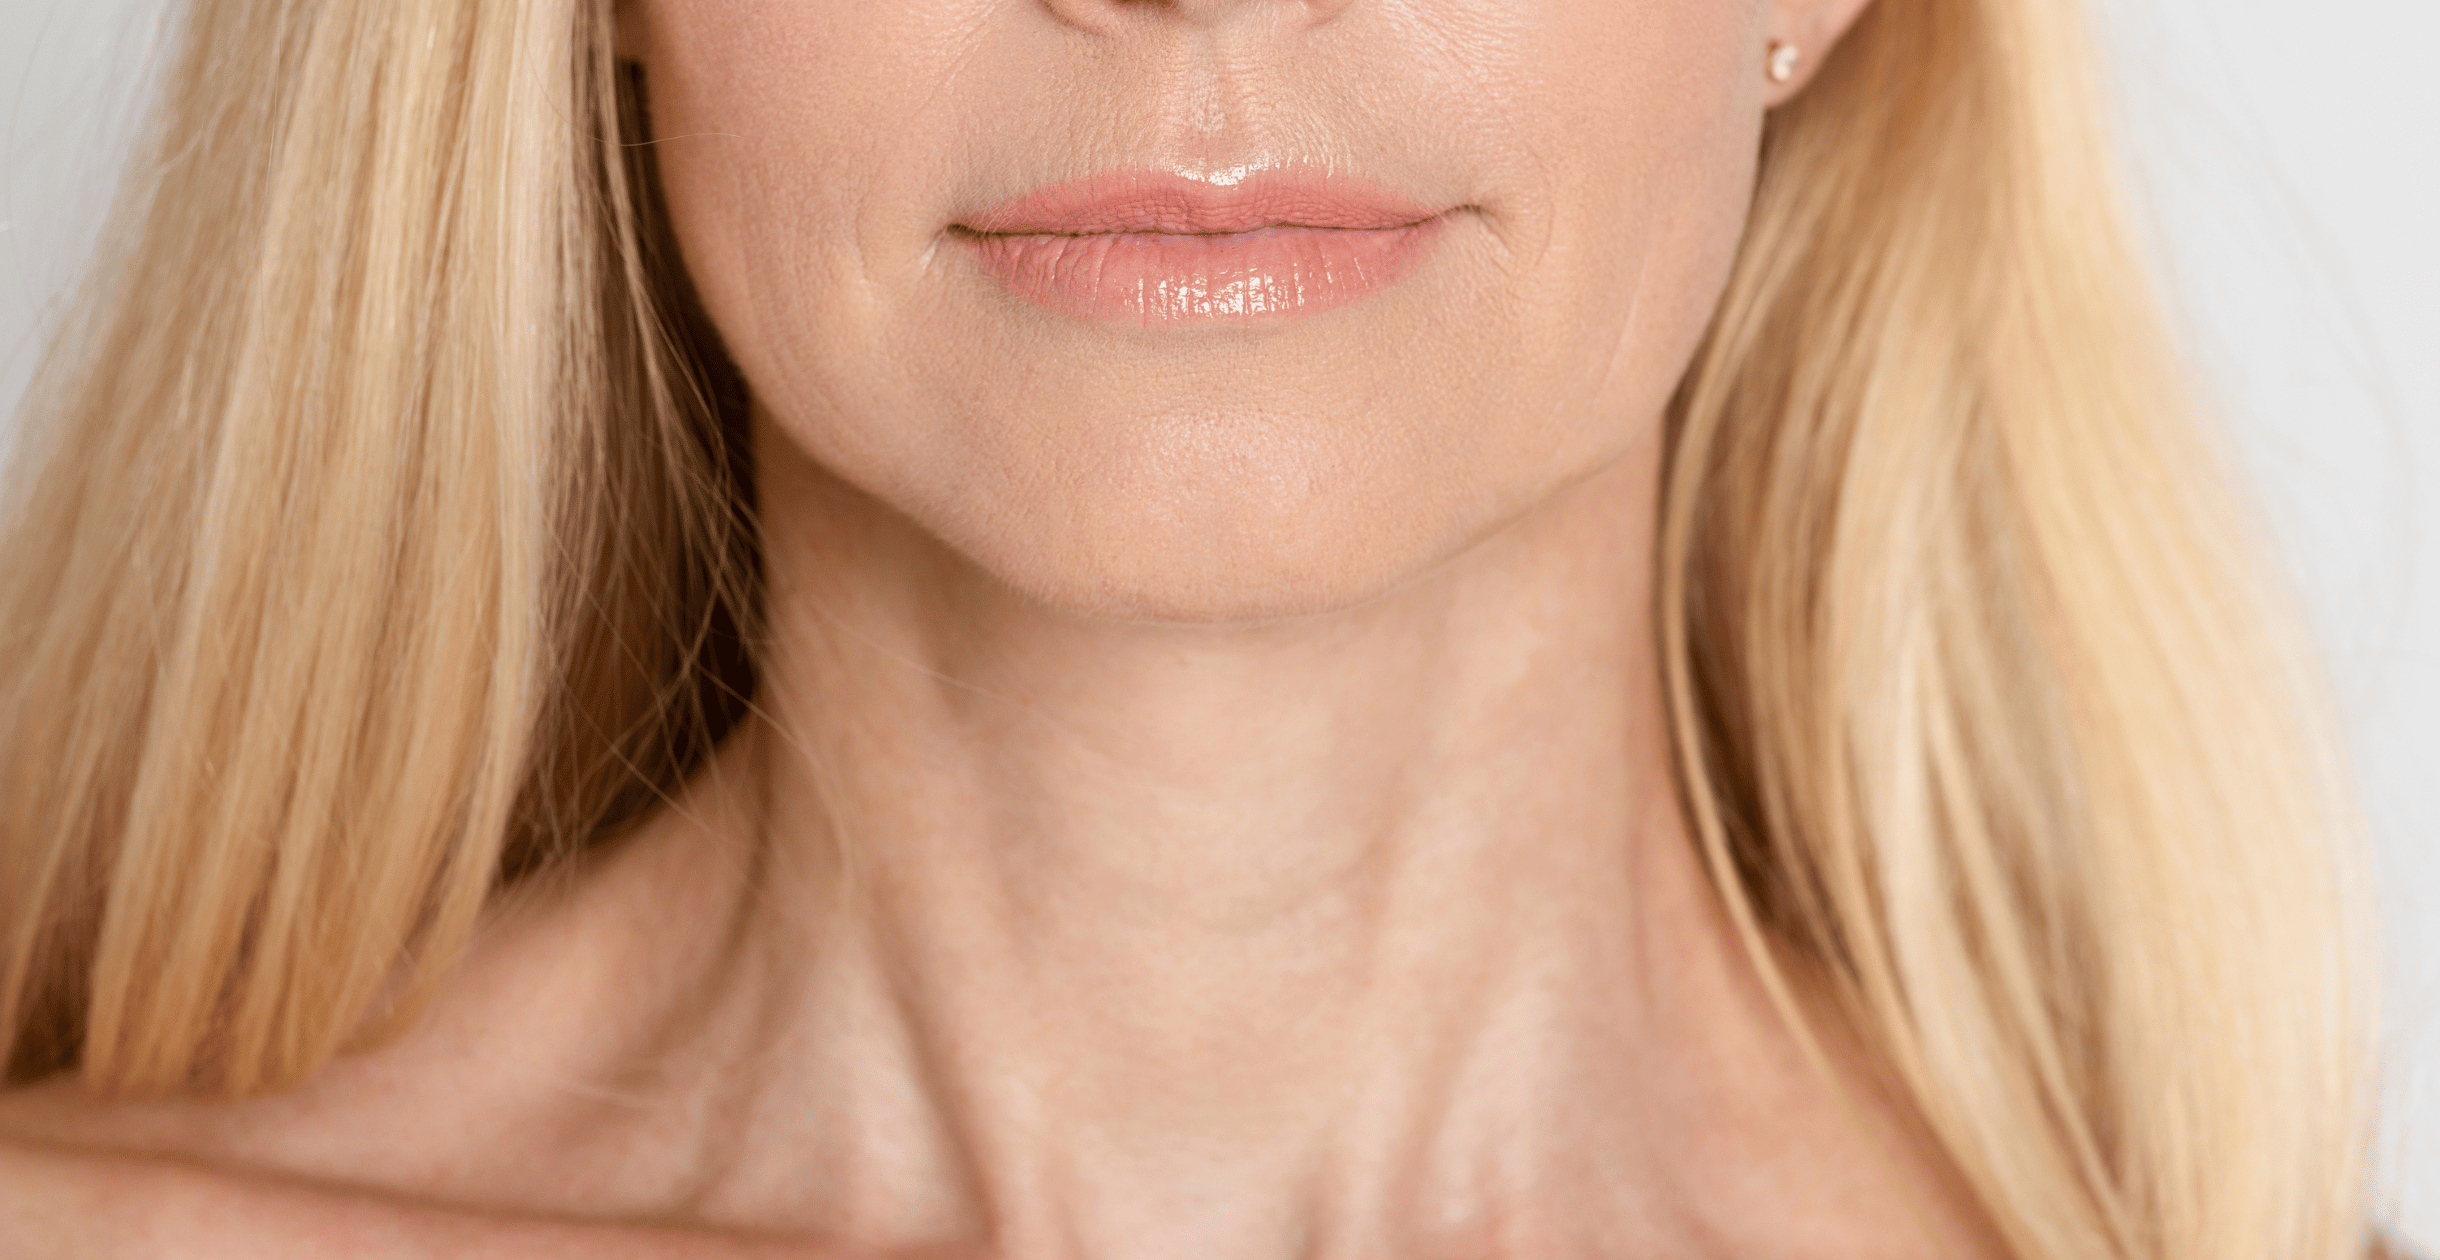 How to treat neck wrinkles